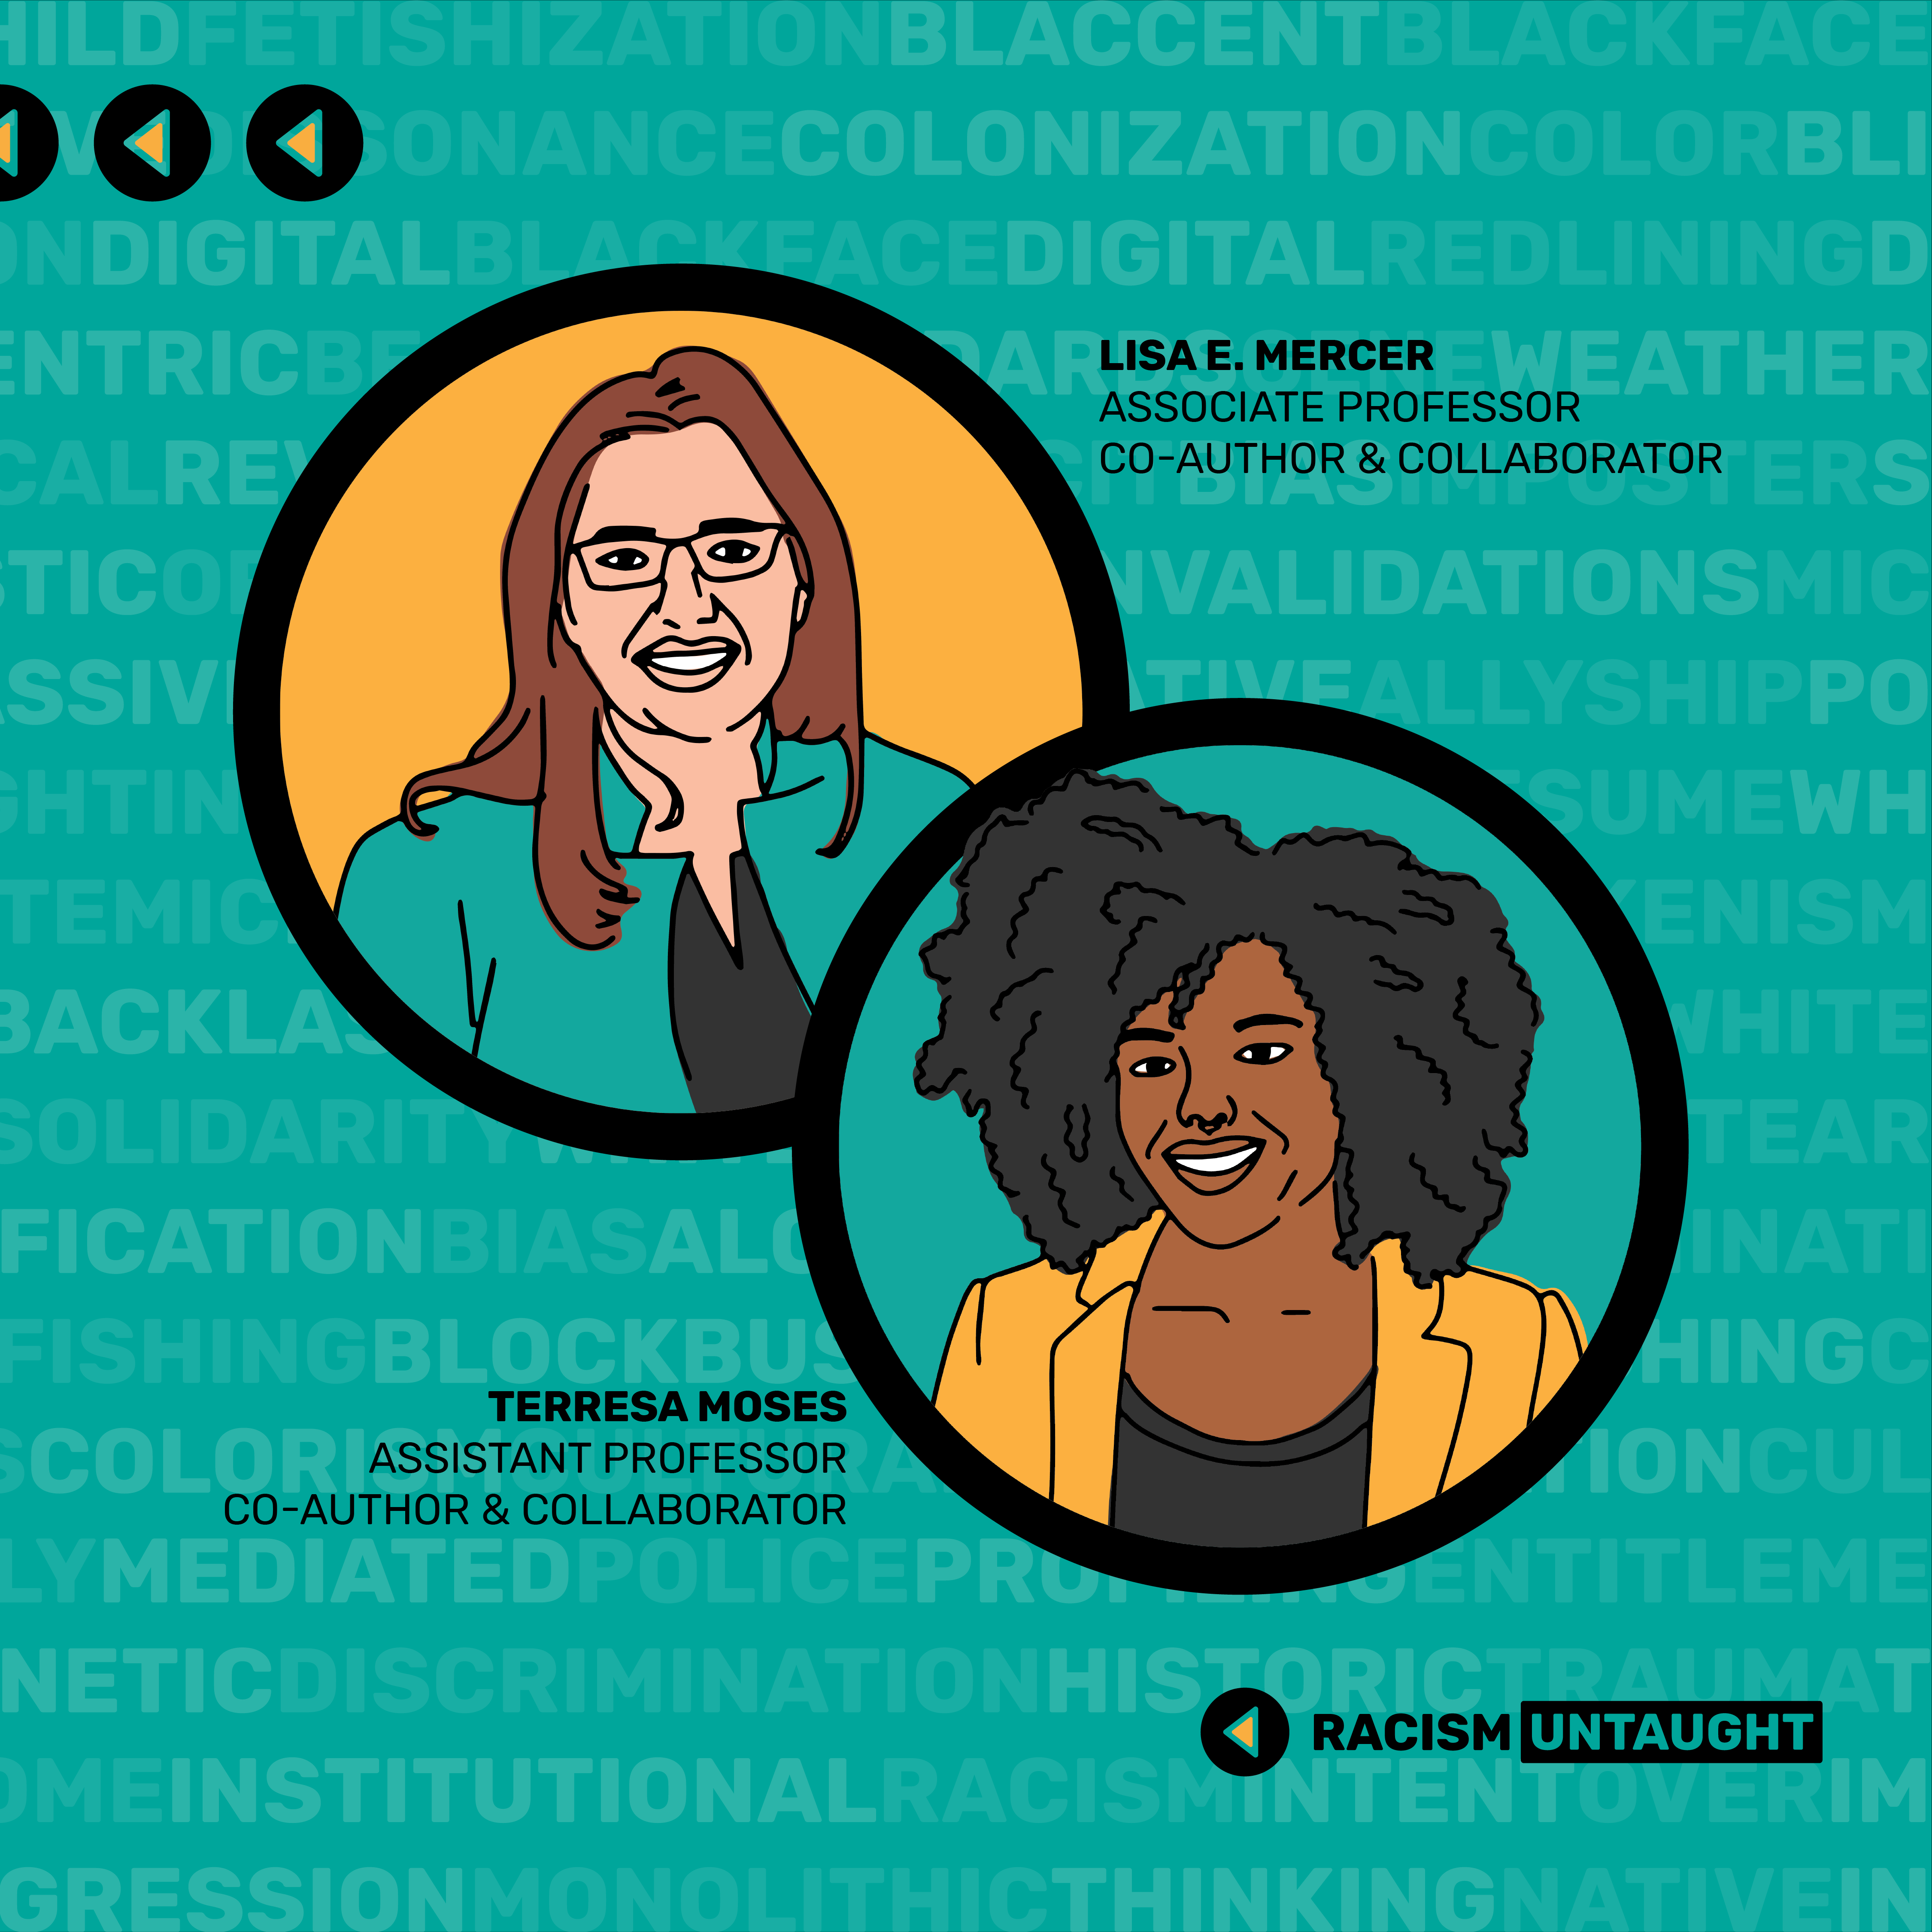 Illustrated profile images of Terresa Moses and Lisa Mercer, co-authors of Racism Untaught.